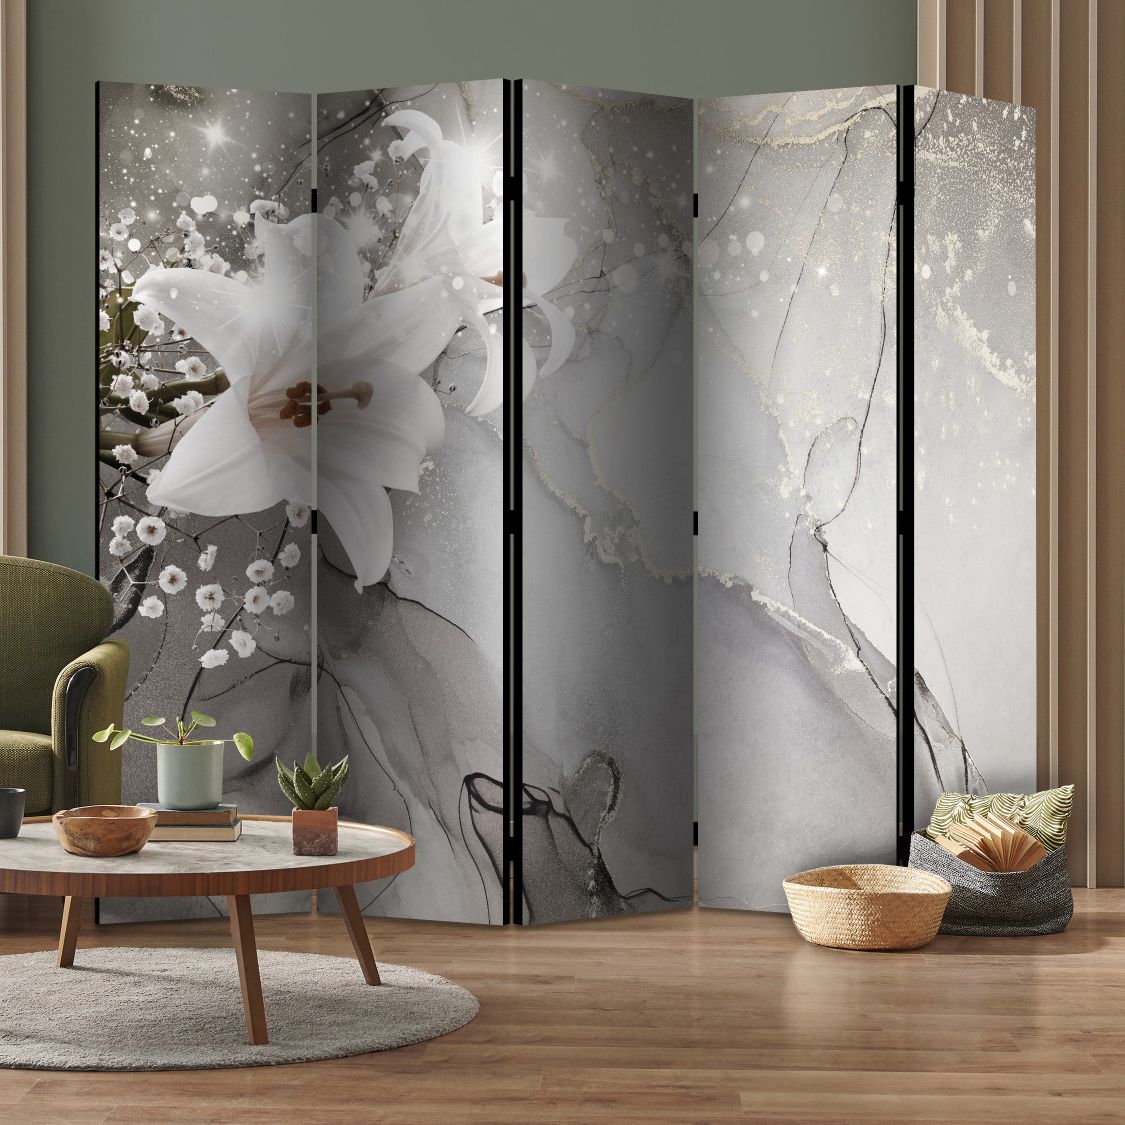 floral room divider screen in a living room, you see wooden floor and a table next to the partition screen that is decorative and have a flower design on the left side of the divider